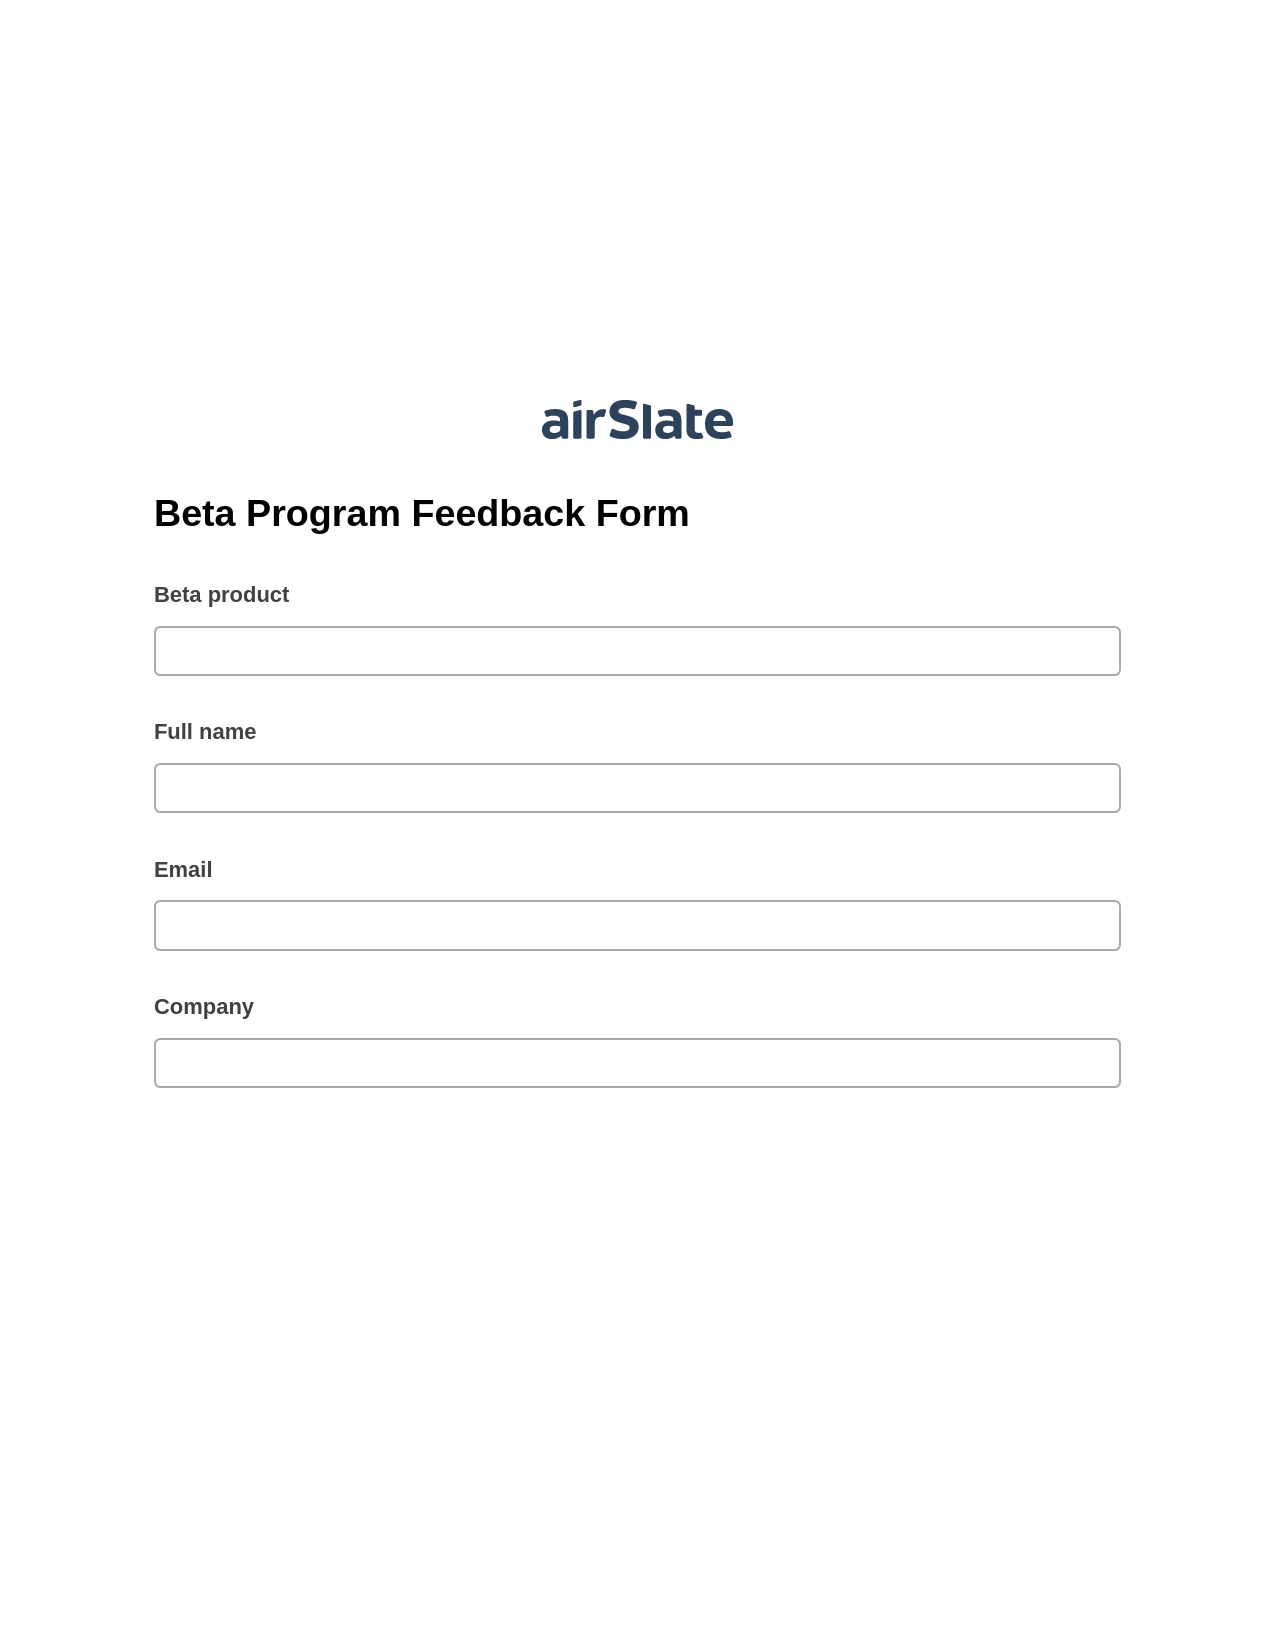 Multirole Beta Program Feedback Form Pre-fill from NetSuite Records Bot, Remove Tags From Slate Bot, Archive to SharePoint Folder Bot